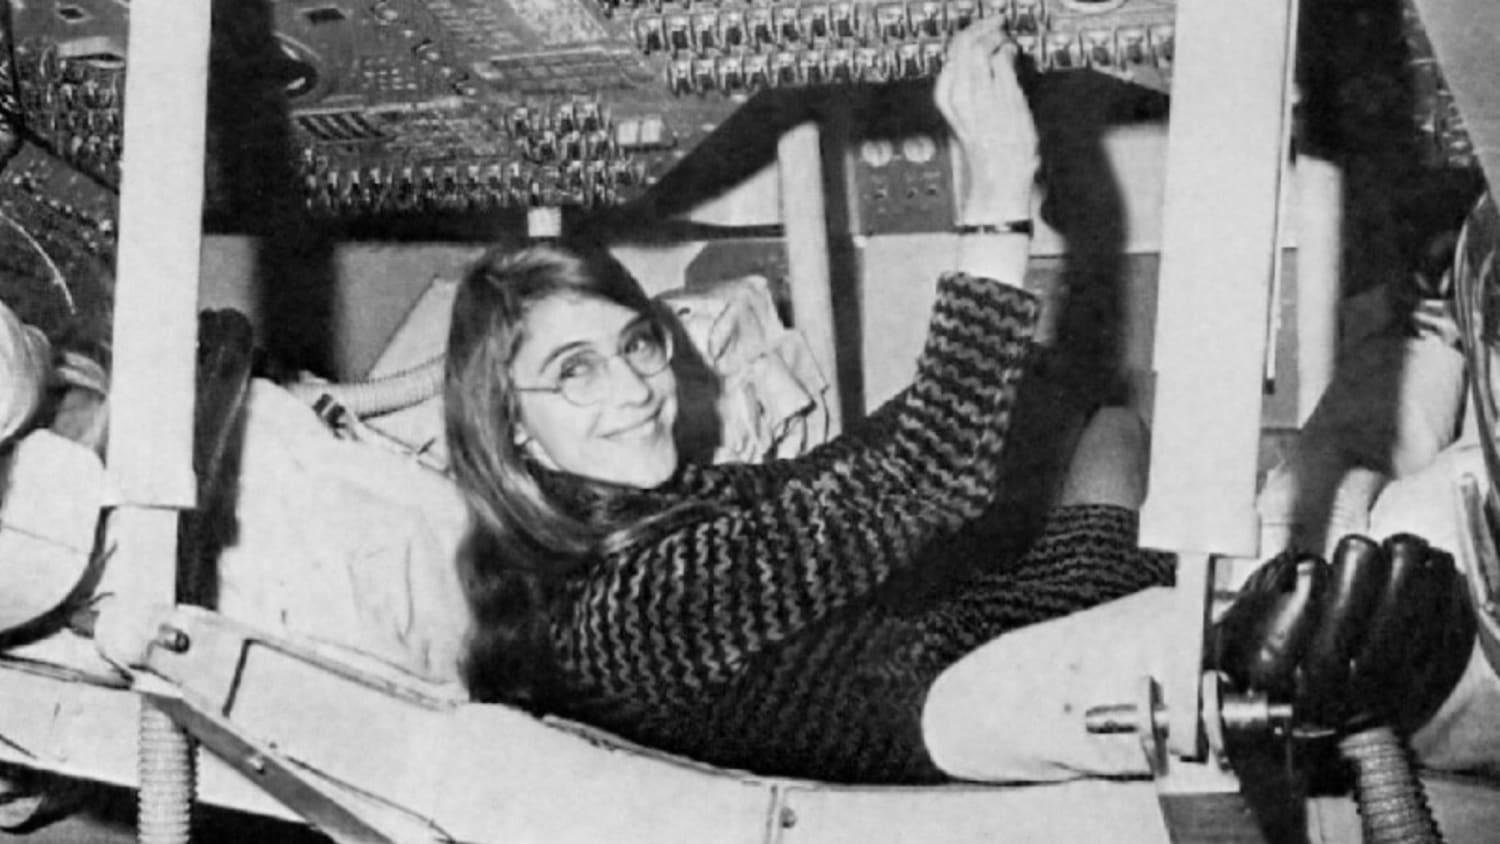 Meet Margaret Hamilton: The Woman Behind the Apollo Project